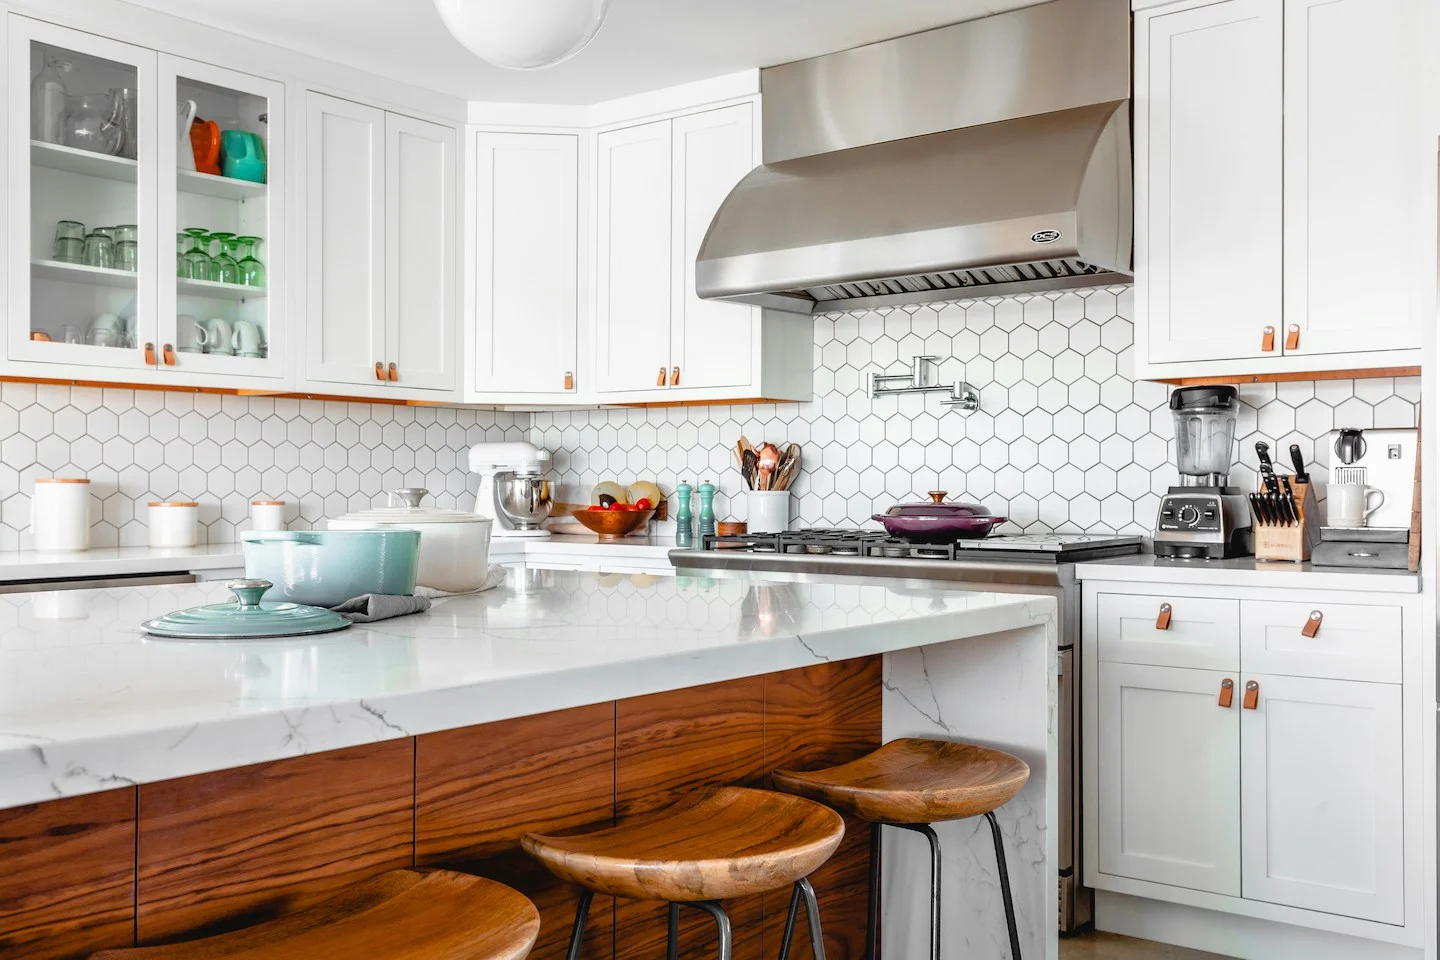 Brightly lit kitchen with white tile and wooden accents inside home in Northeast Austin.